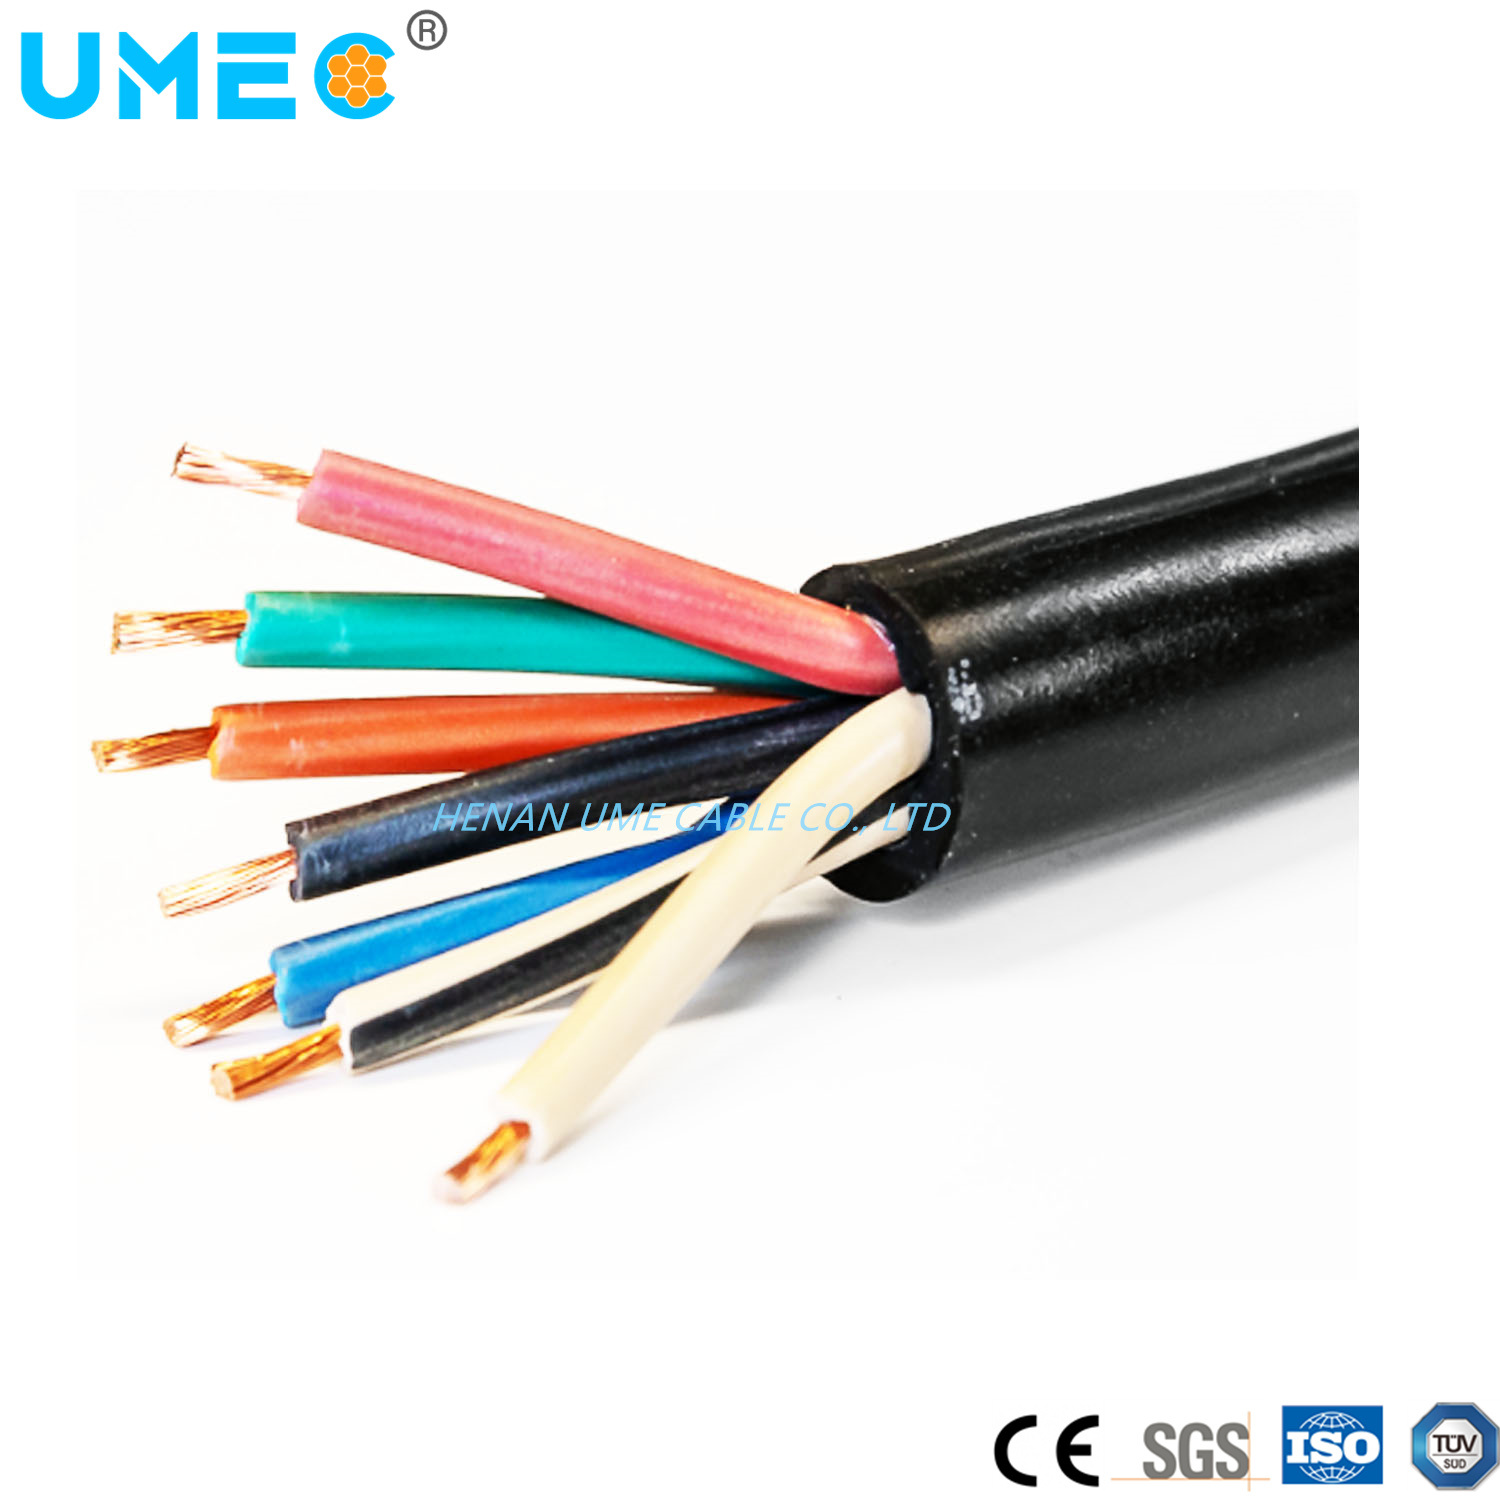 600V Low Voltage Flexible Cable 3X12AWG 3X10AWG 3X8AWG 4X10AWG 4X8AWG So Sow Soow Sjoow Epr CPE Rubber Cable